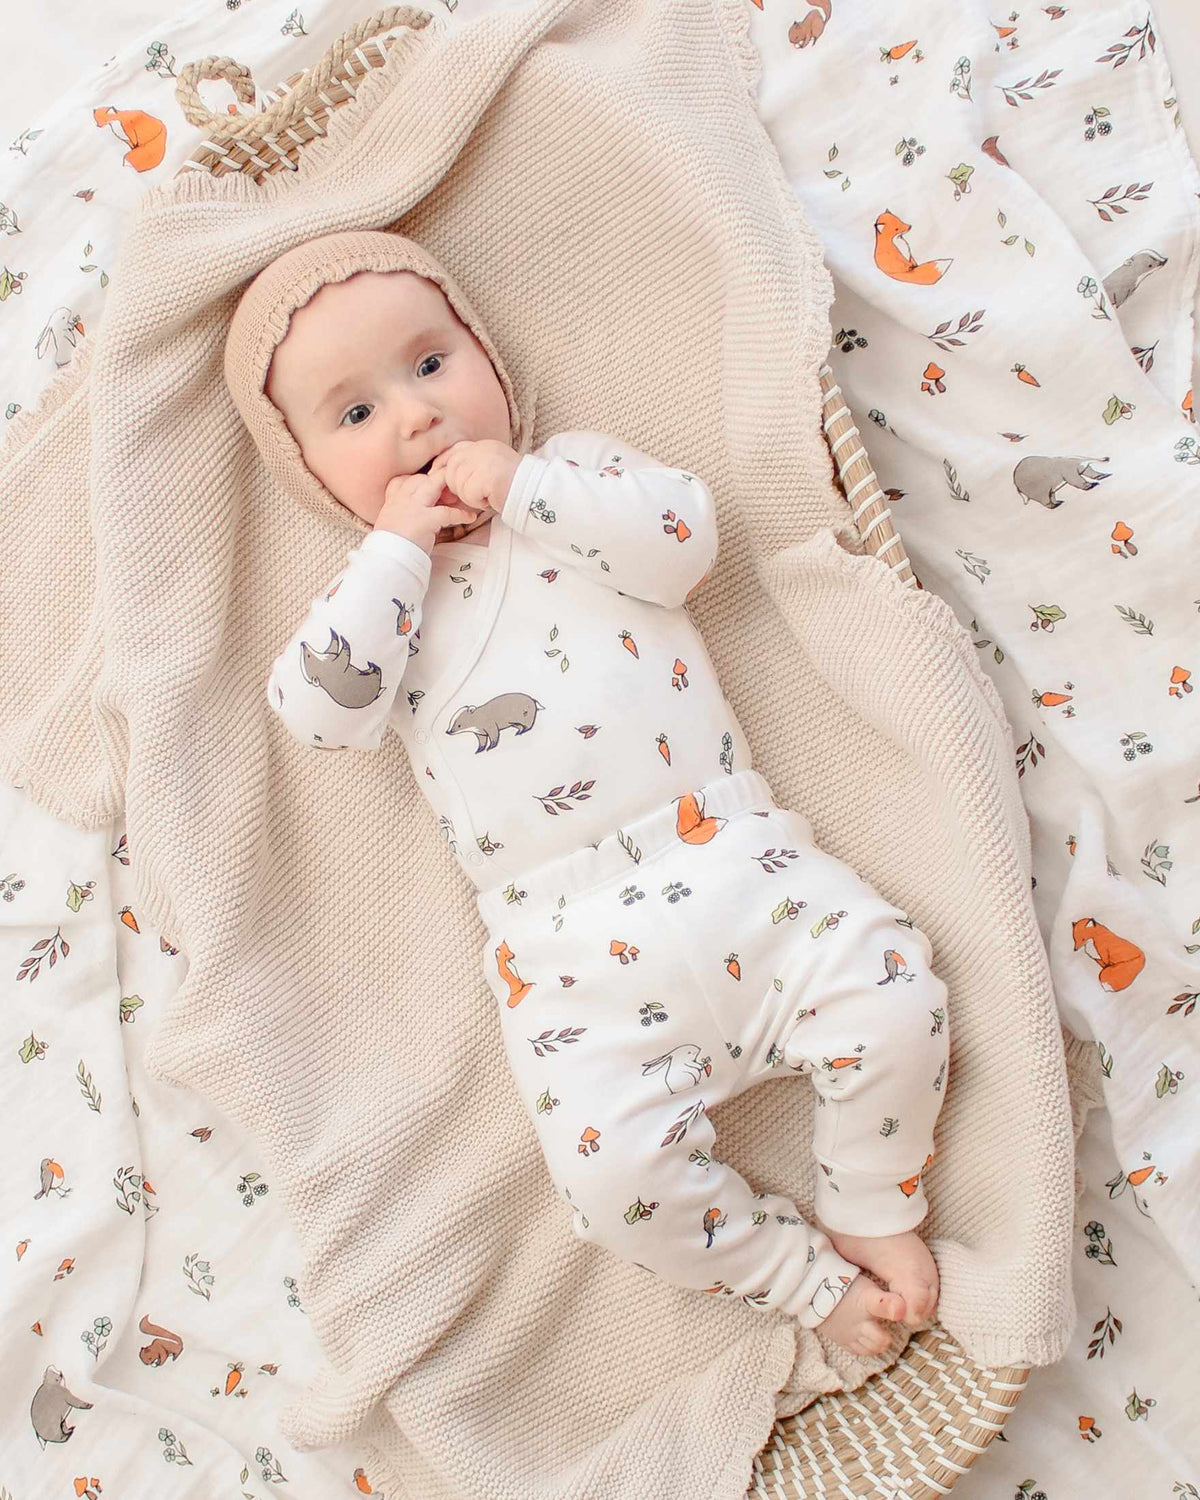 Baby in Kimono bodysuit and leggings outfit in woodland design